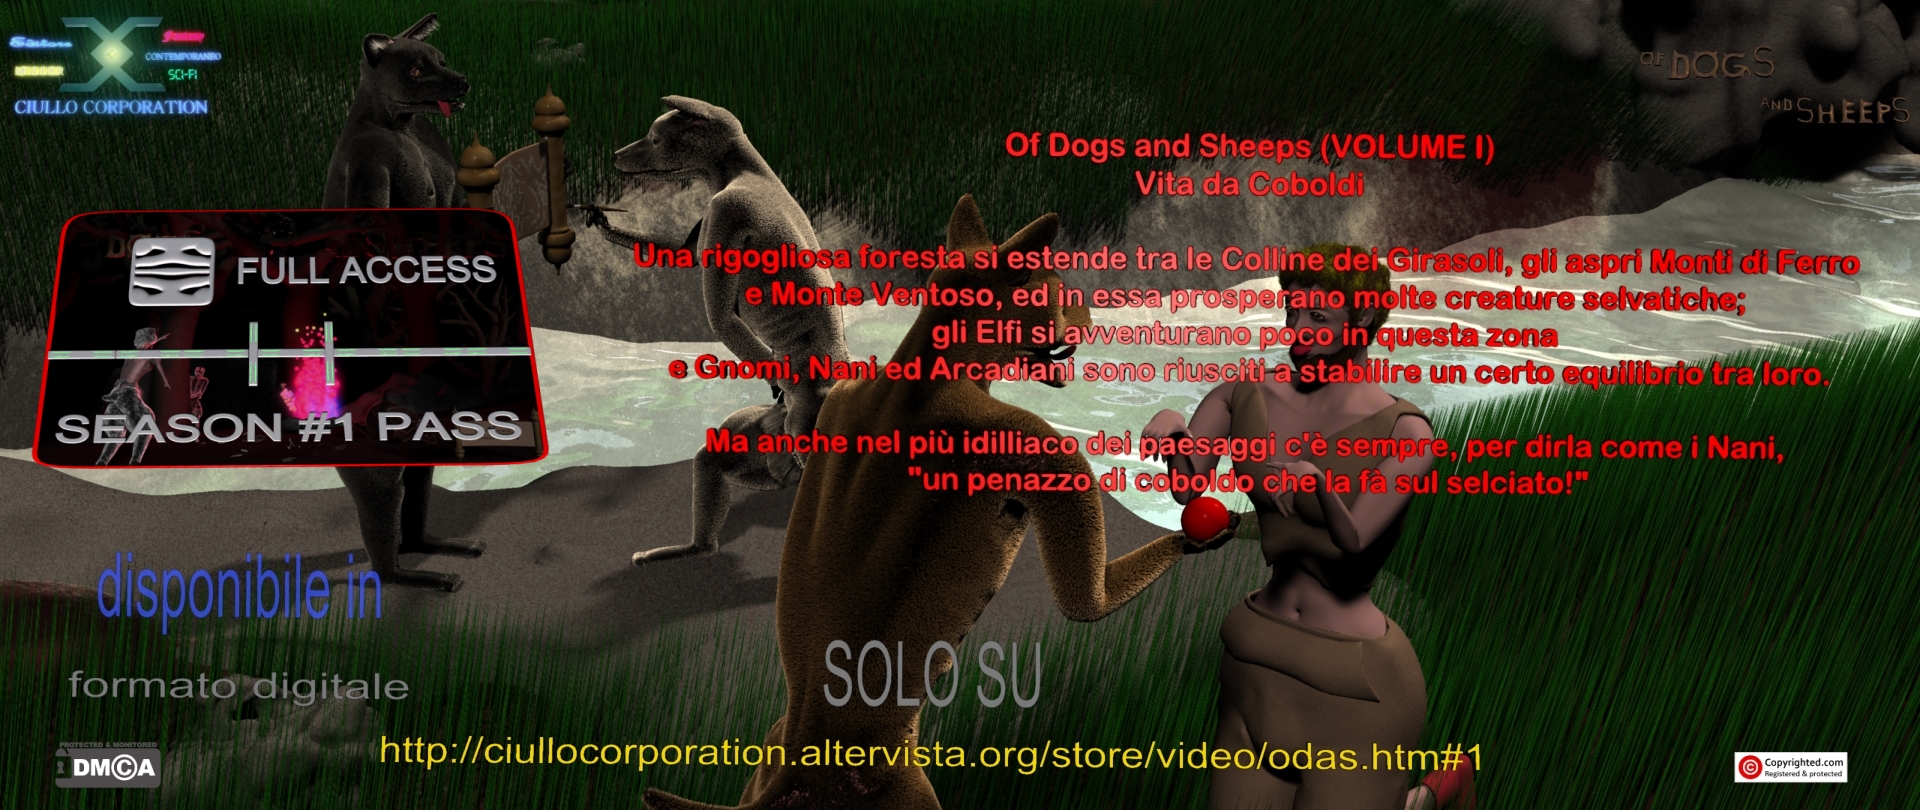 Of Dogs and Sheeps (VOLUME I - Episodio #2)